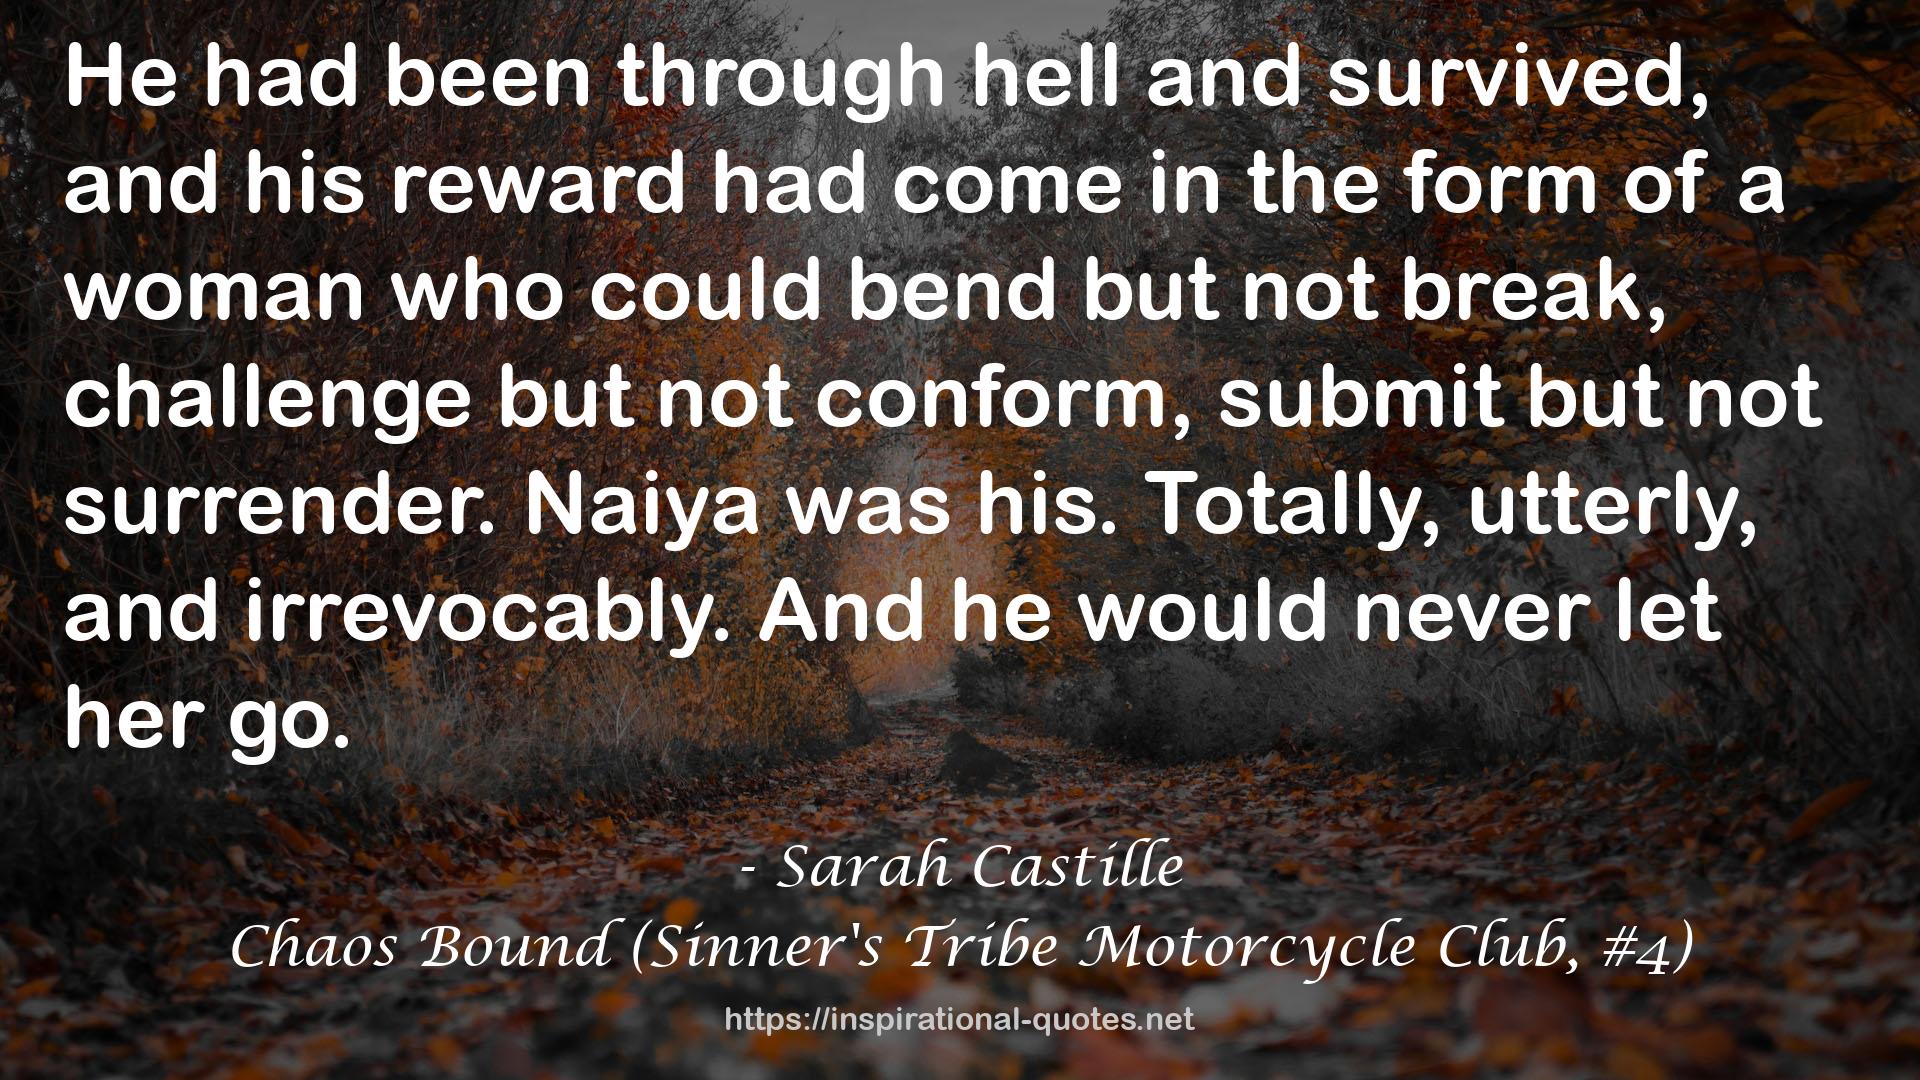 Chaos Bound (Sinner's Tribe Motorcycle Club, #4) QUOTES